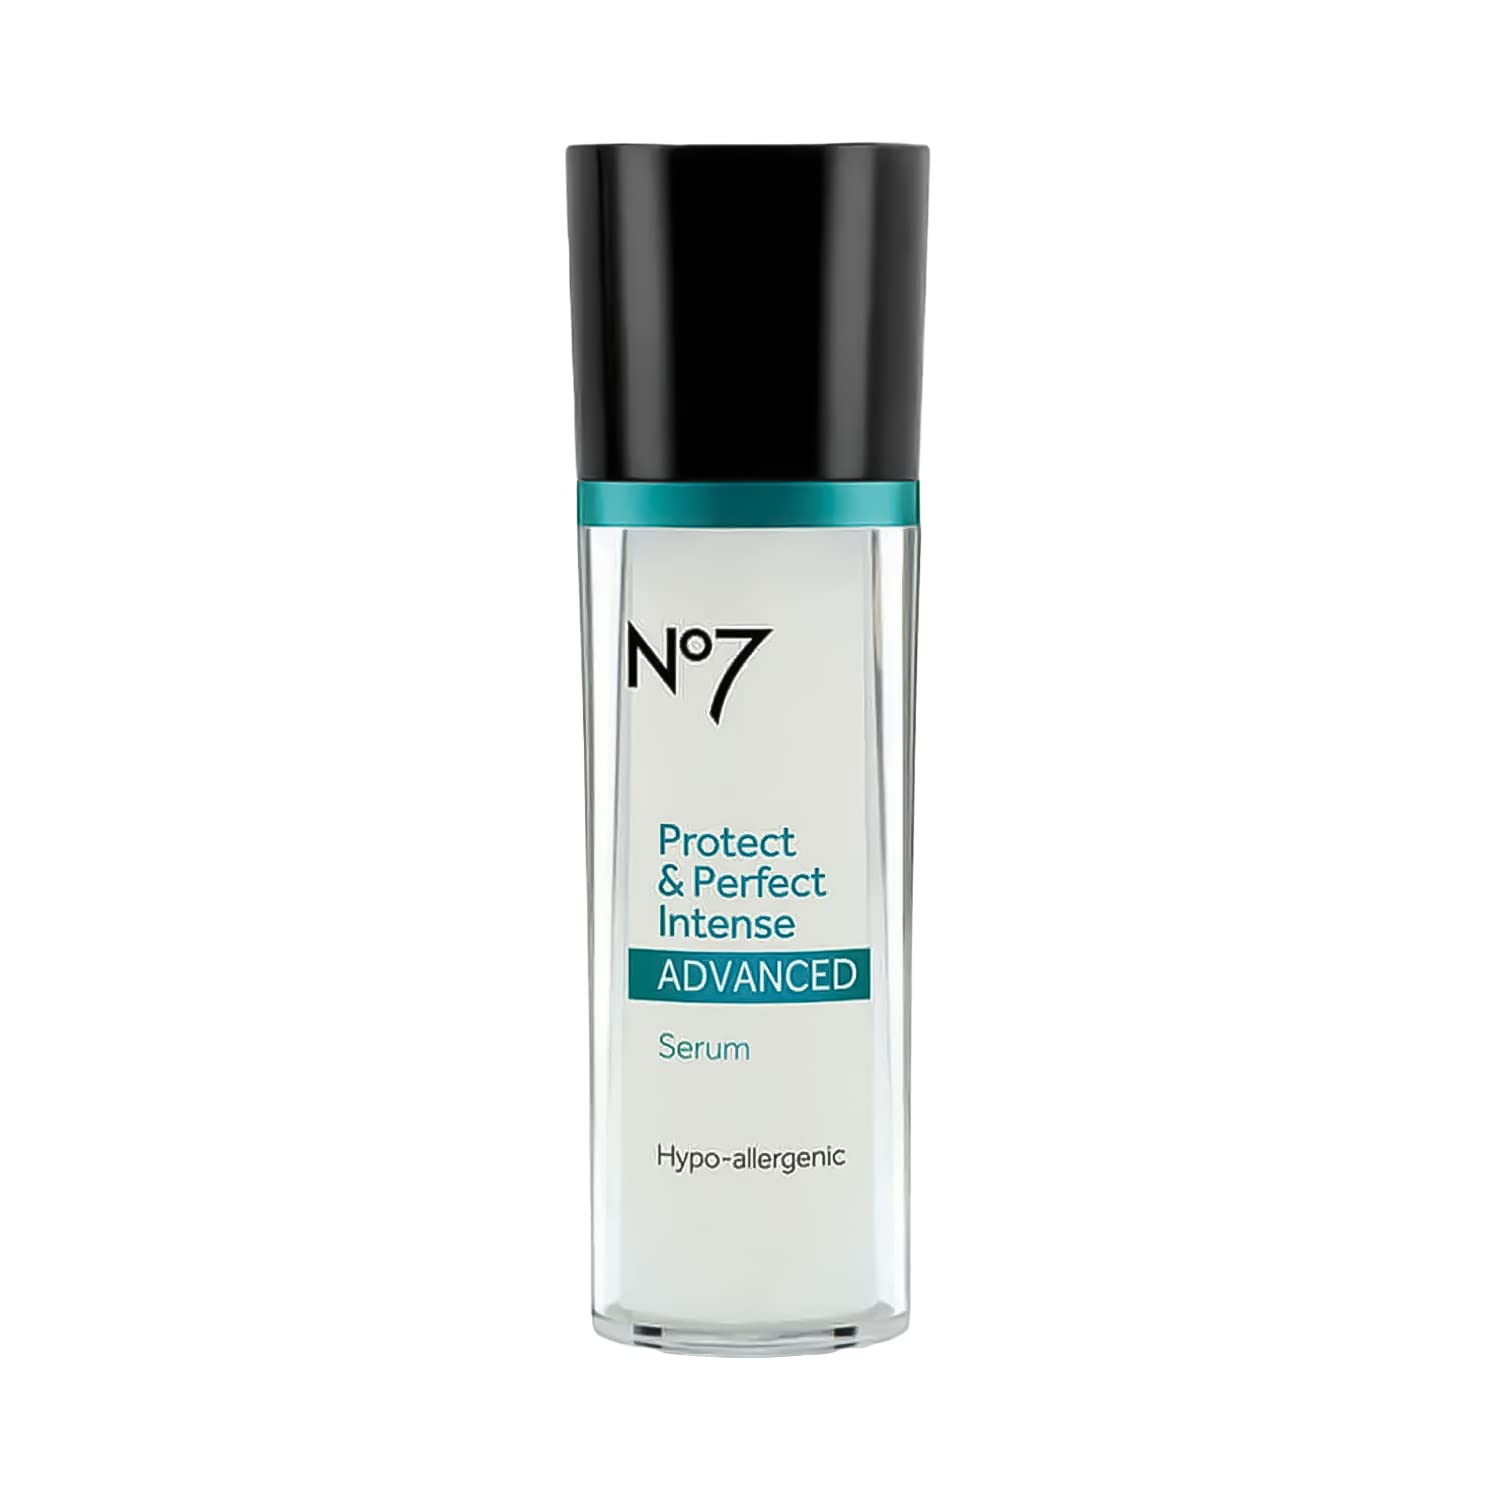 No7 Protect & Perfect Intense Advanced Serum - Hydrating Serum with Hyaluronic Acid - Serum For Wrinkles with Rice Protein & Alfalfa Complex - Anti Aging Face Serum with Matrix 3000+ Technology (1oz)